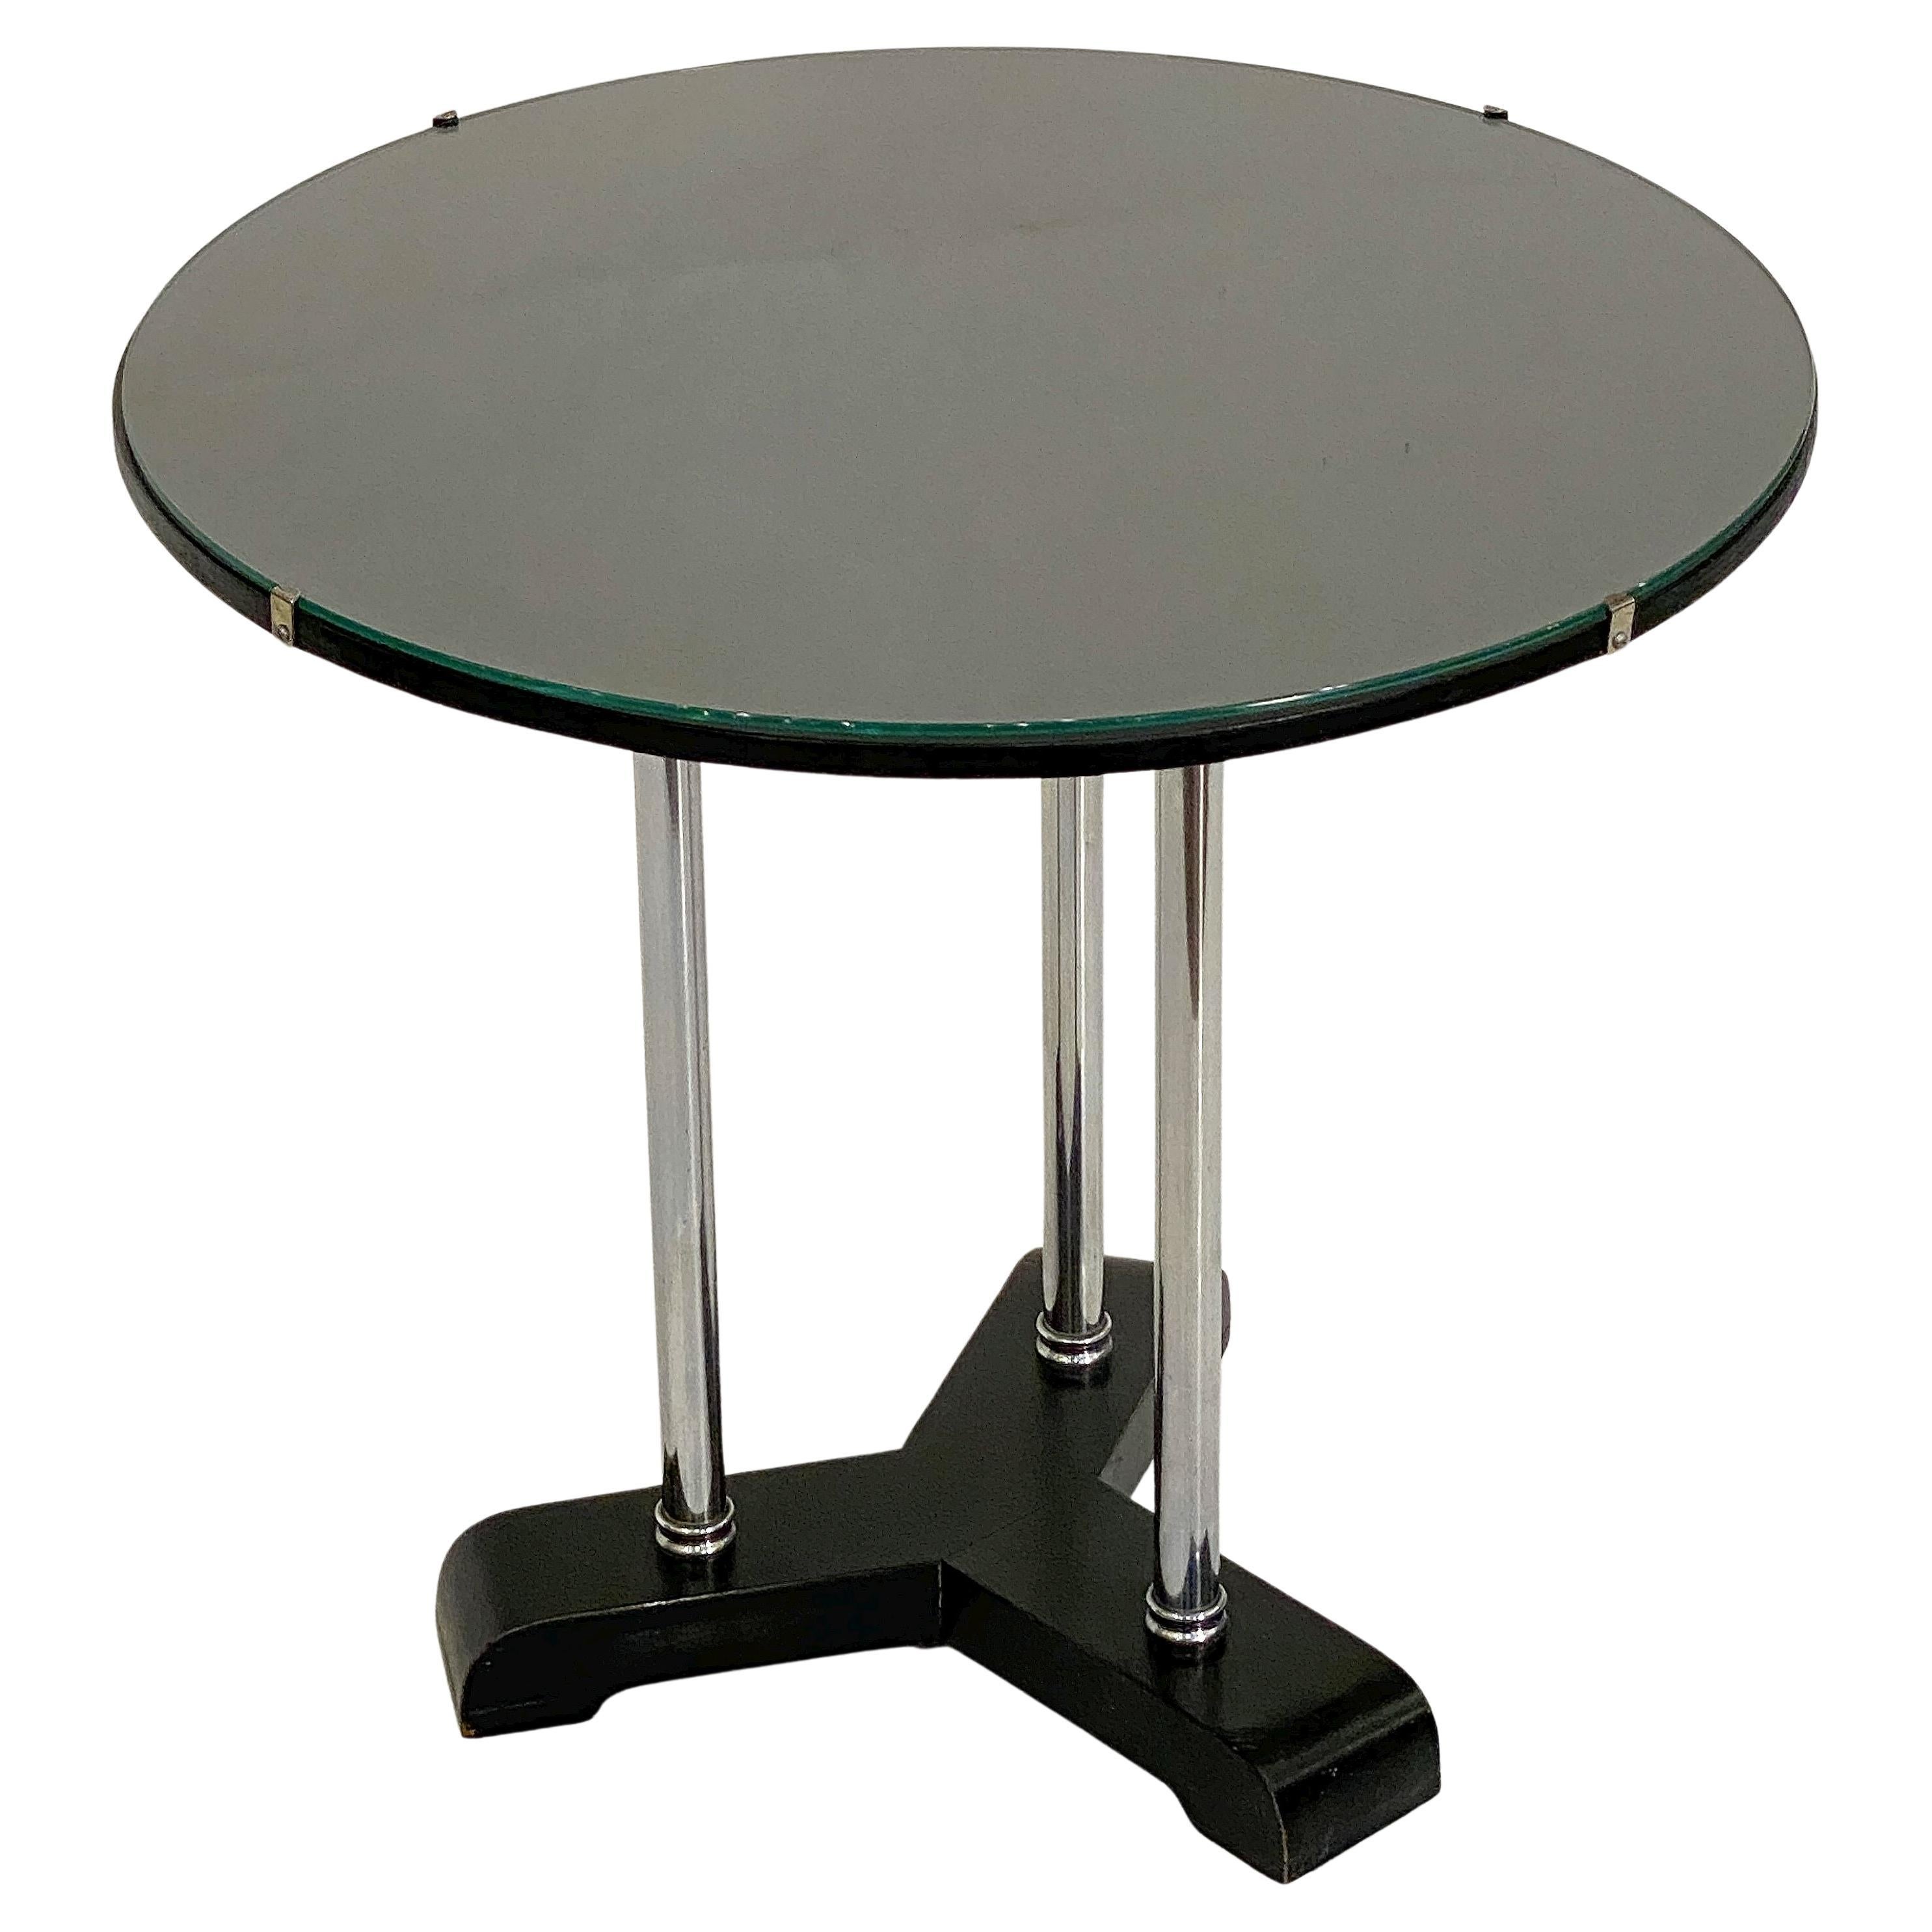 English Art Deco Round Drinks Tripod Table of Chrome, Ebonized Wood, and Glass For Sale